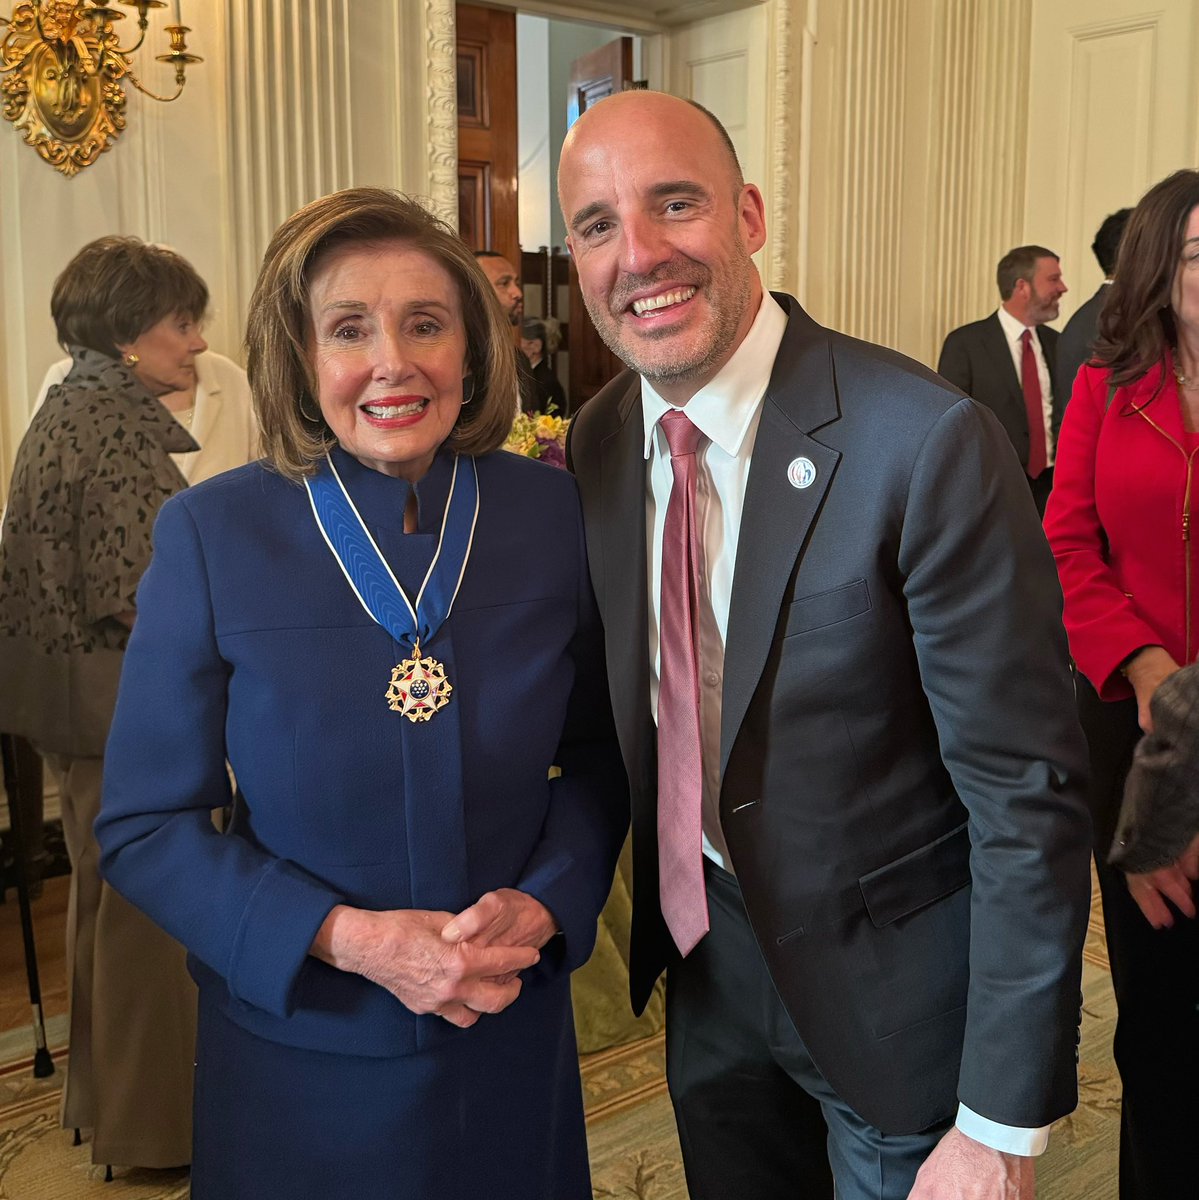 We're so proud @SpeakerPelosi received Prez Medal of Freedom on the same day as Senator Dole. She has been a staunch ally of @DoleFoundation and a great friend. Thank you for your service to the nation.